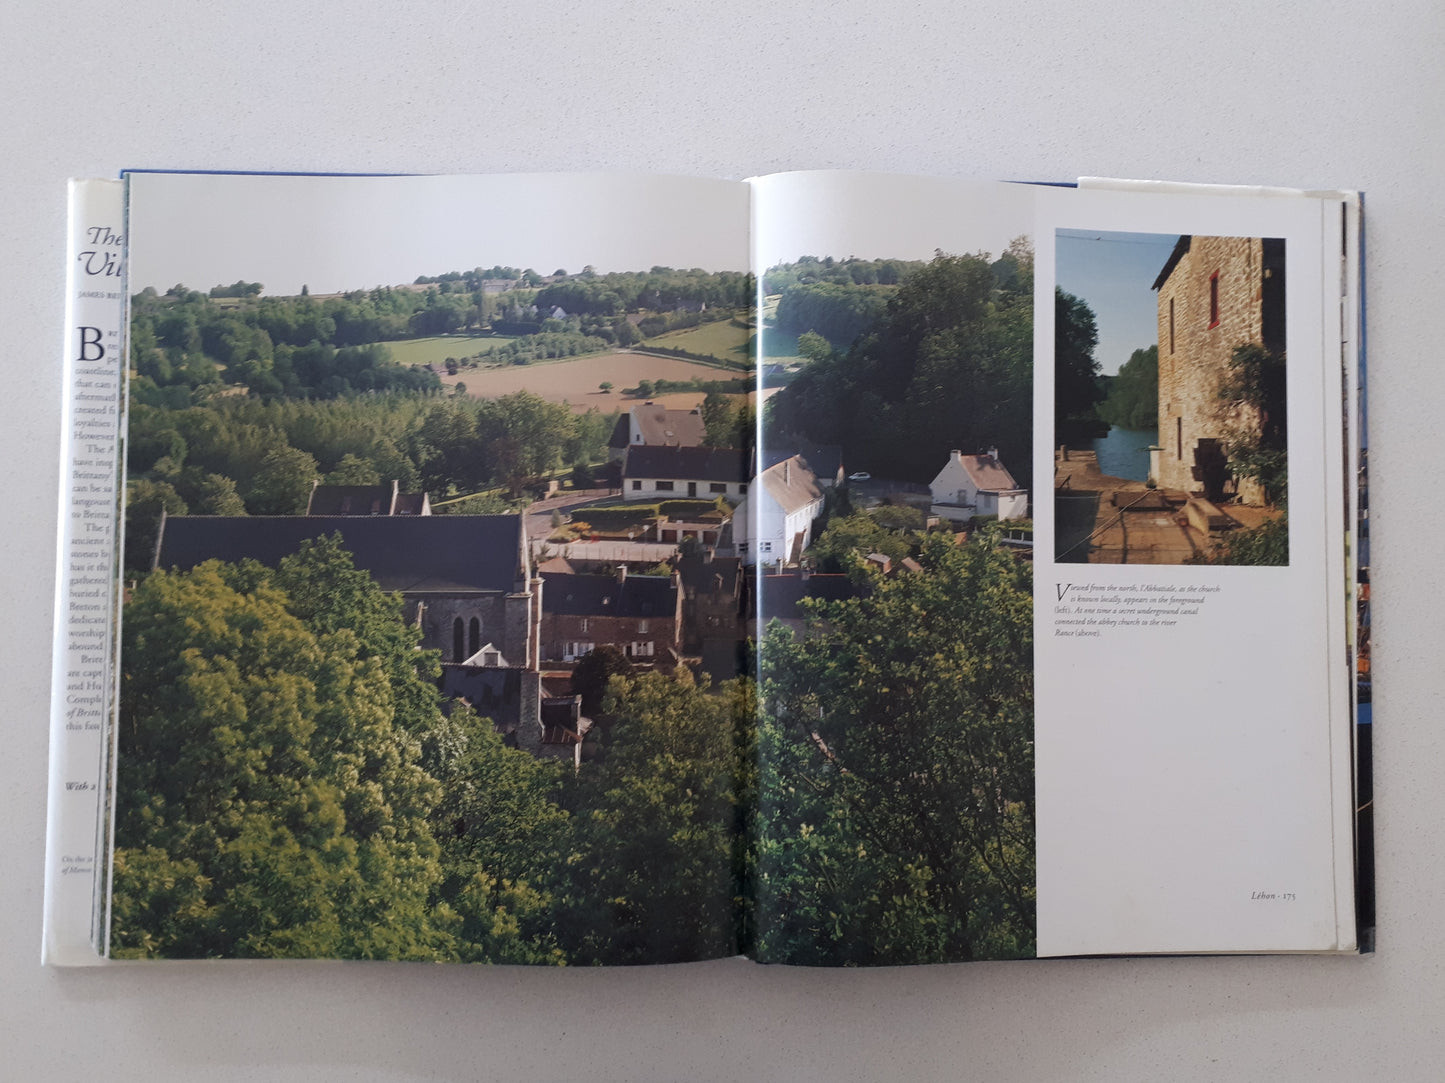 The Most Beautiful Villages of Brittany by James Bentley & Hugh Palmer